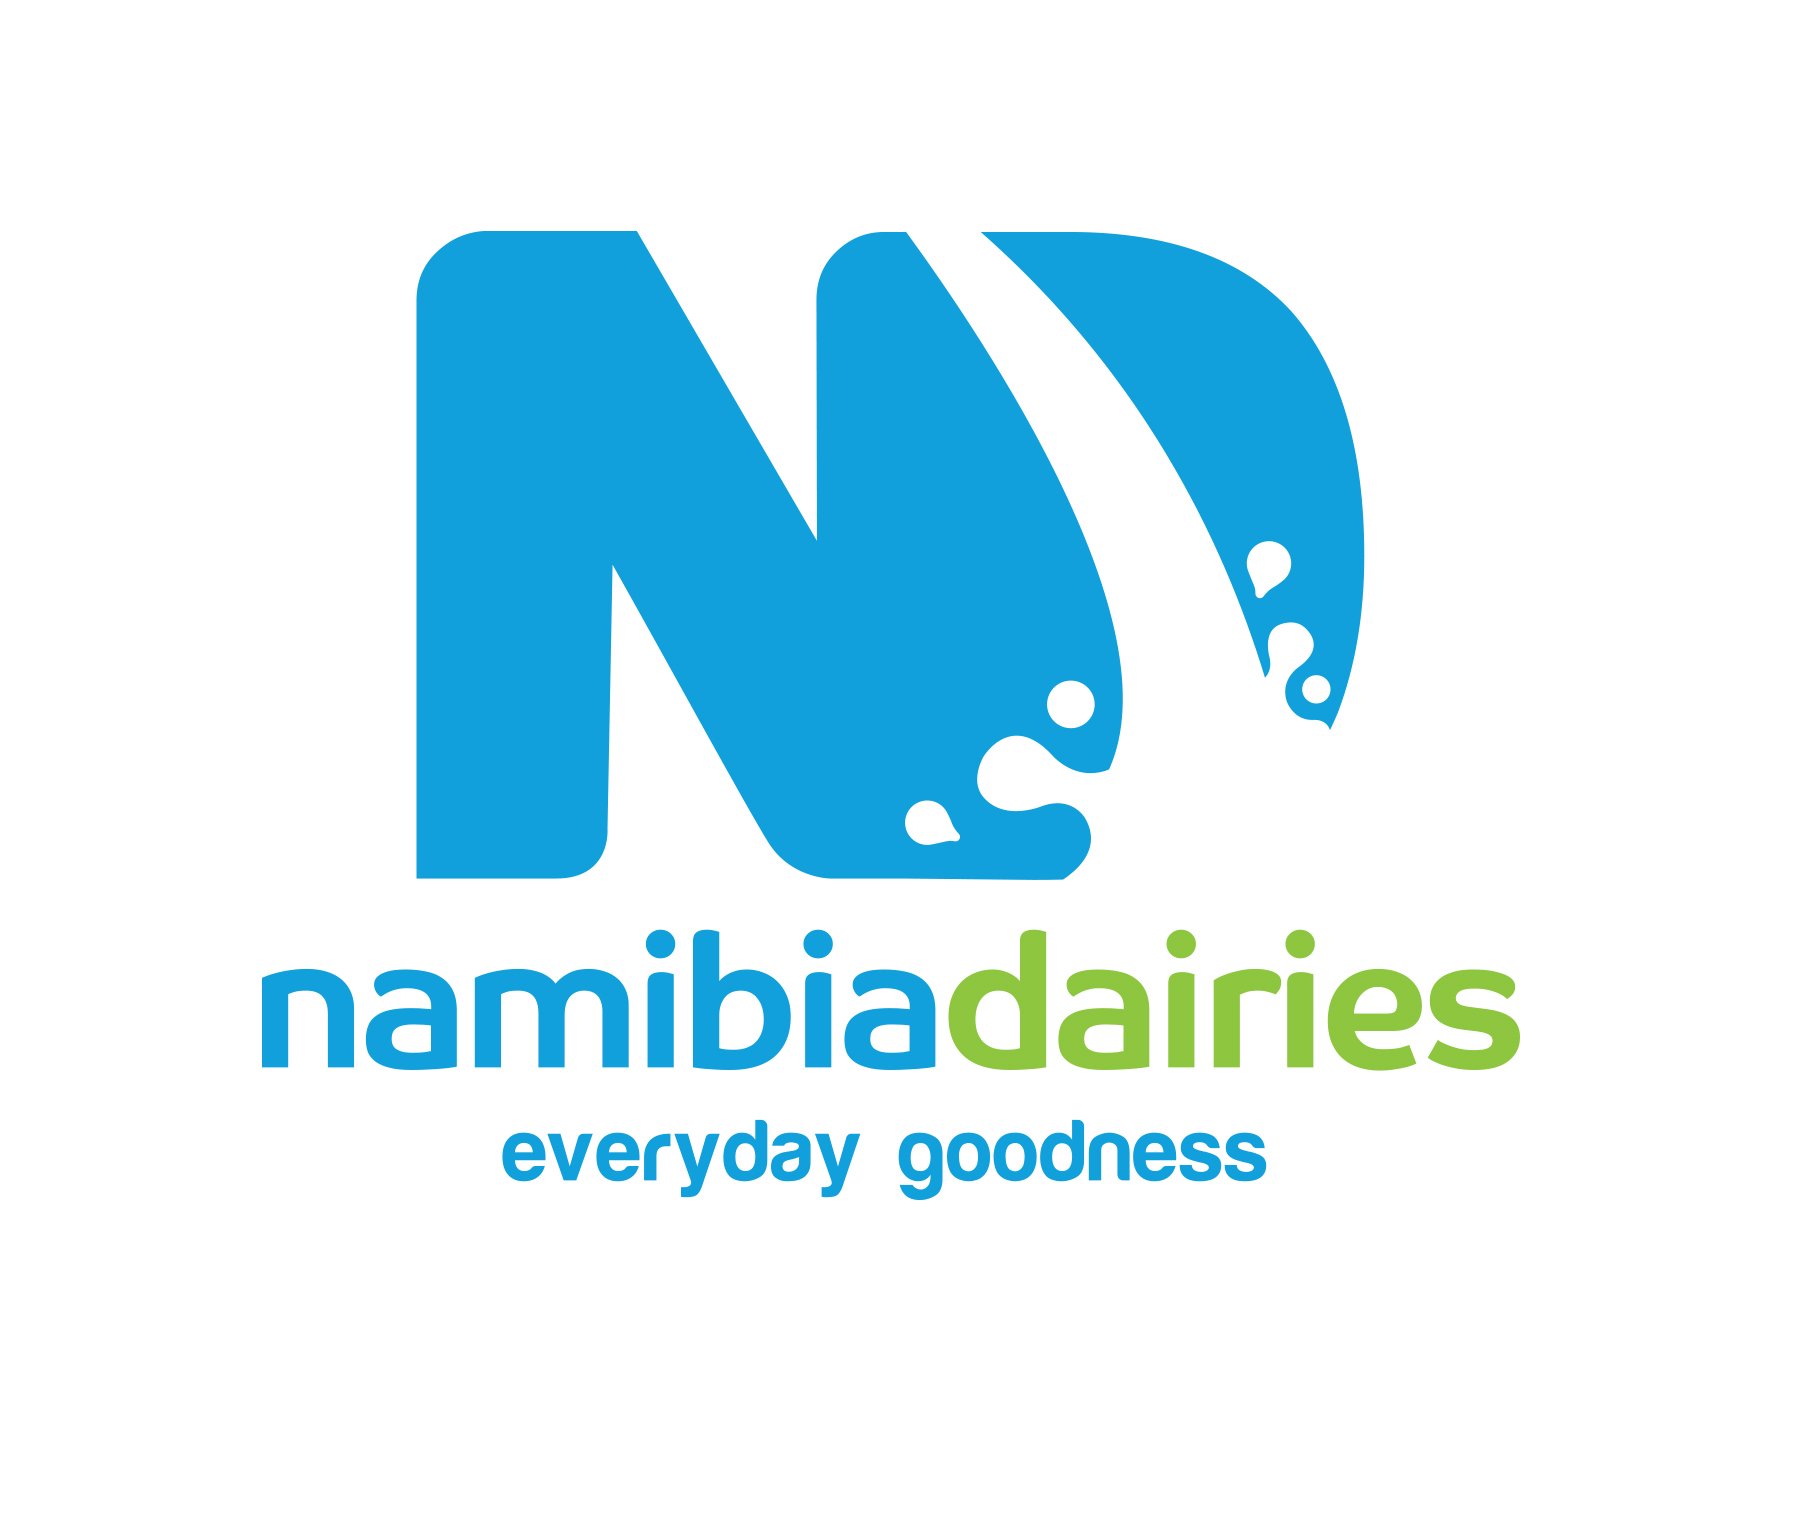 Namibia Dairies is the major supplier of fresh and long-life milk, value-added dairy products and other beverages in Namibia.